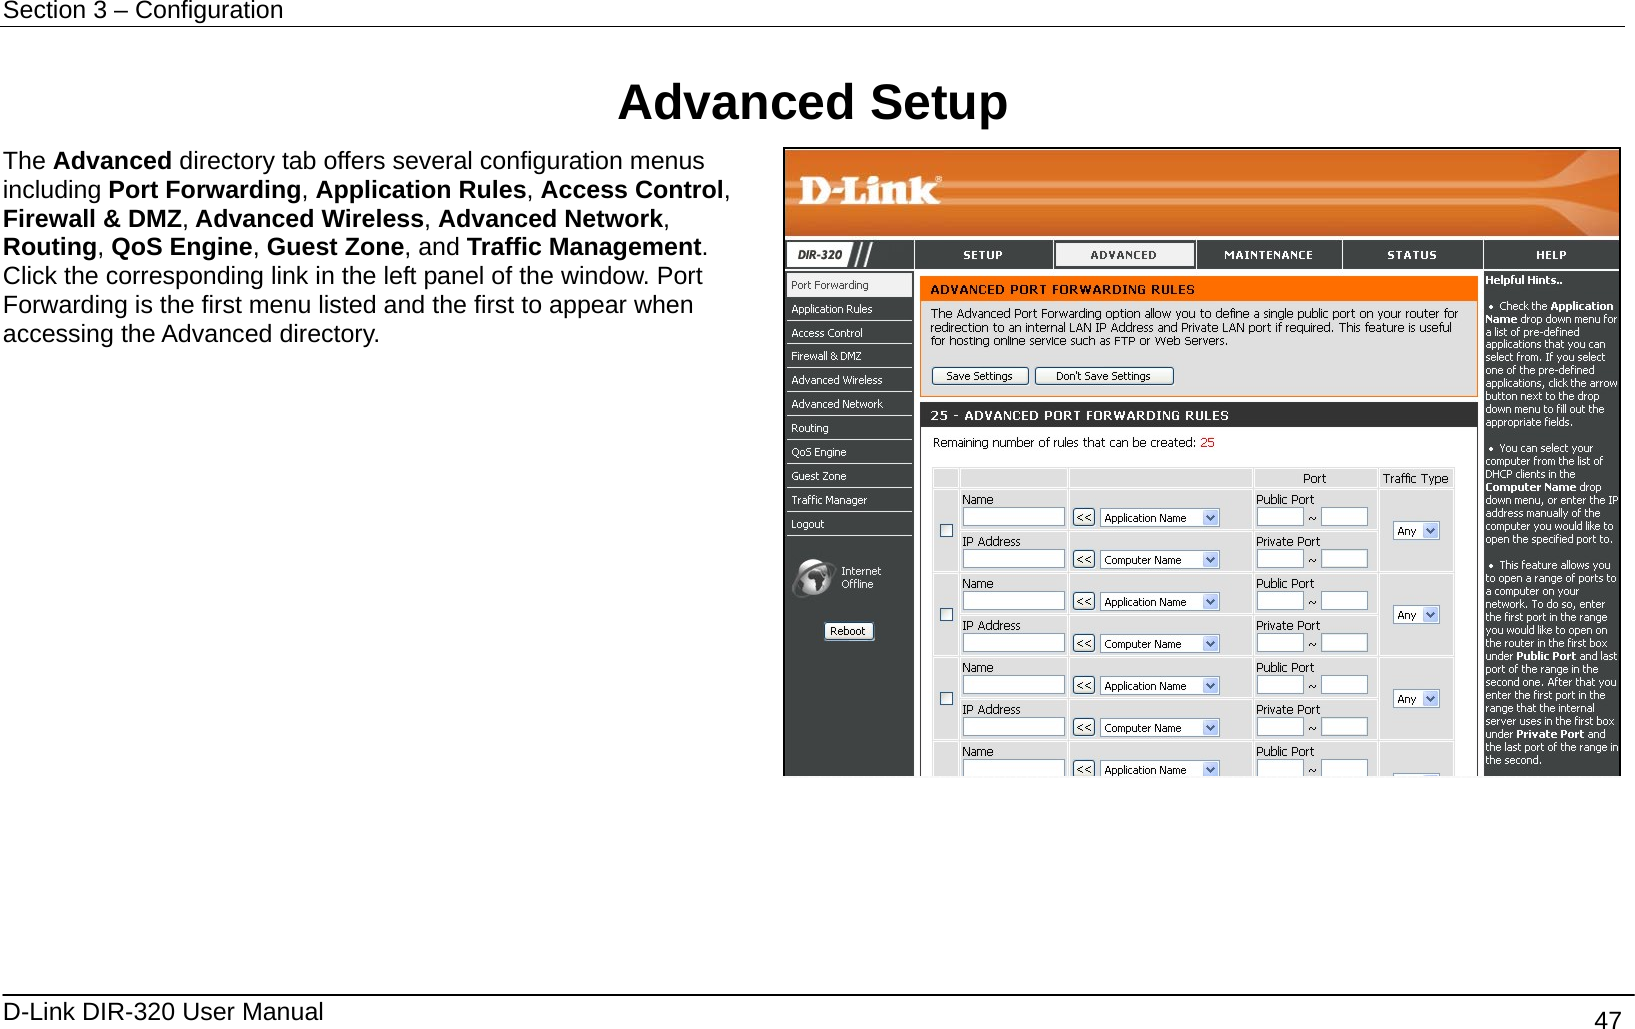 Section 3 – Configuration   D-Link DIR-320 User Manual                                       47  Advanced Setup The Advanced directory tab offers several configuration menus including Port Forwarding, Application Rules, Access Control, Firewall &amp; DMZ, Advanced Wireless, Advanced Network, Routing, QoS Engine, Guest Zone, and Traffic Management. Click the corresponding link in the left panel of the window. Port Forwarding is the first menu listed and the first to appear when accessing the Advanced directory.             